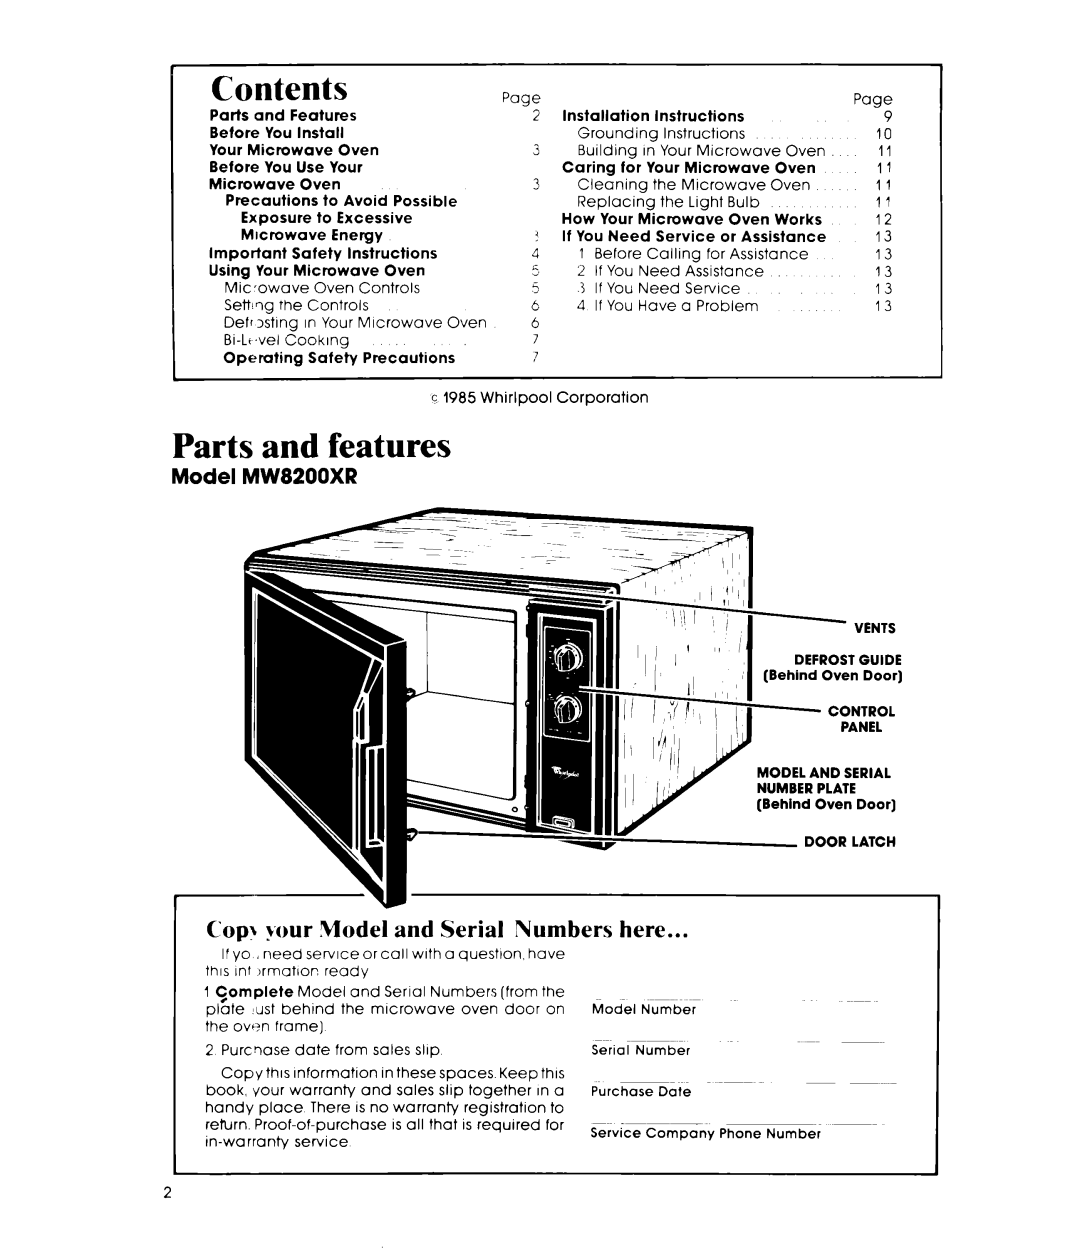 Whirlpool manual Contents, Parts and features, Cop? your Model and Serial Numbers here, Model MW8200XR 